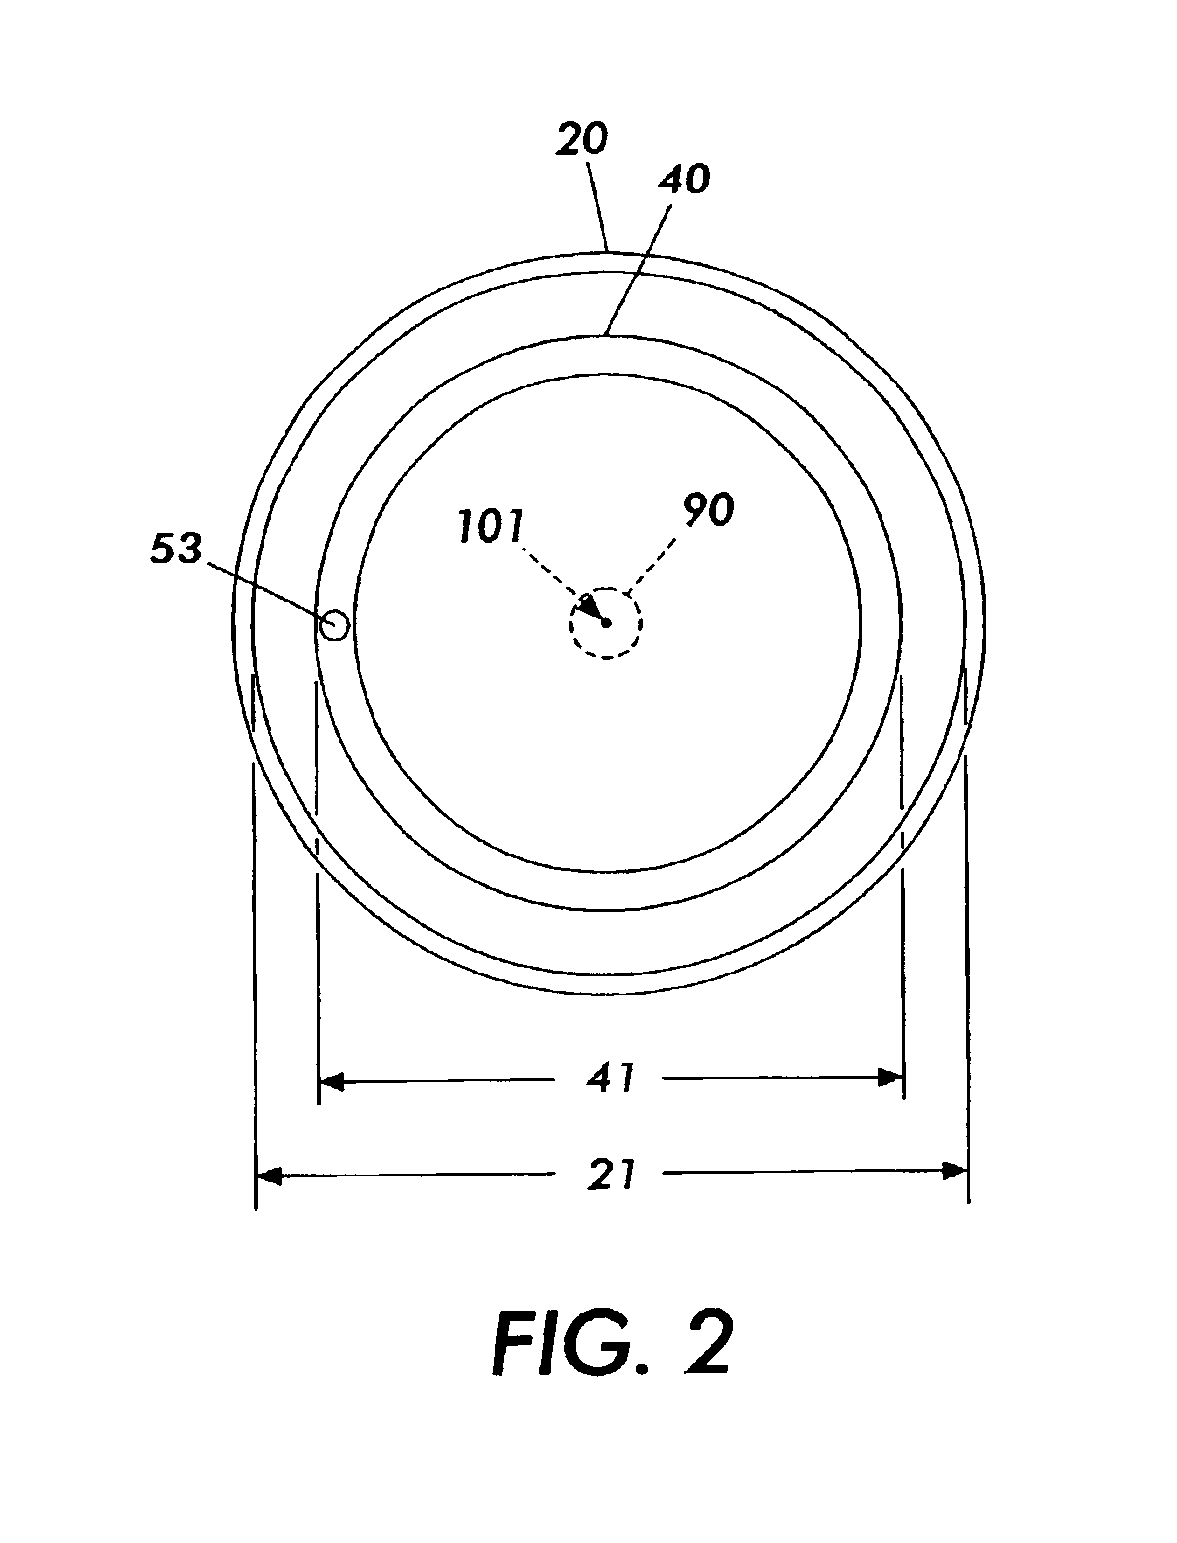 Method of dispensing particles, a particle filling line, and apparatus for dispensing particles